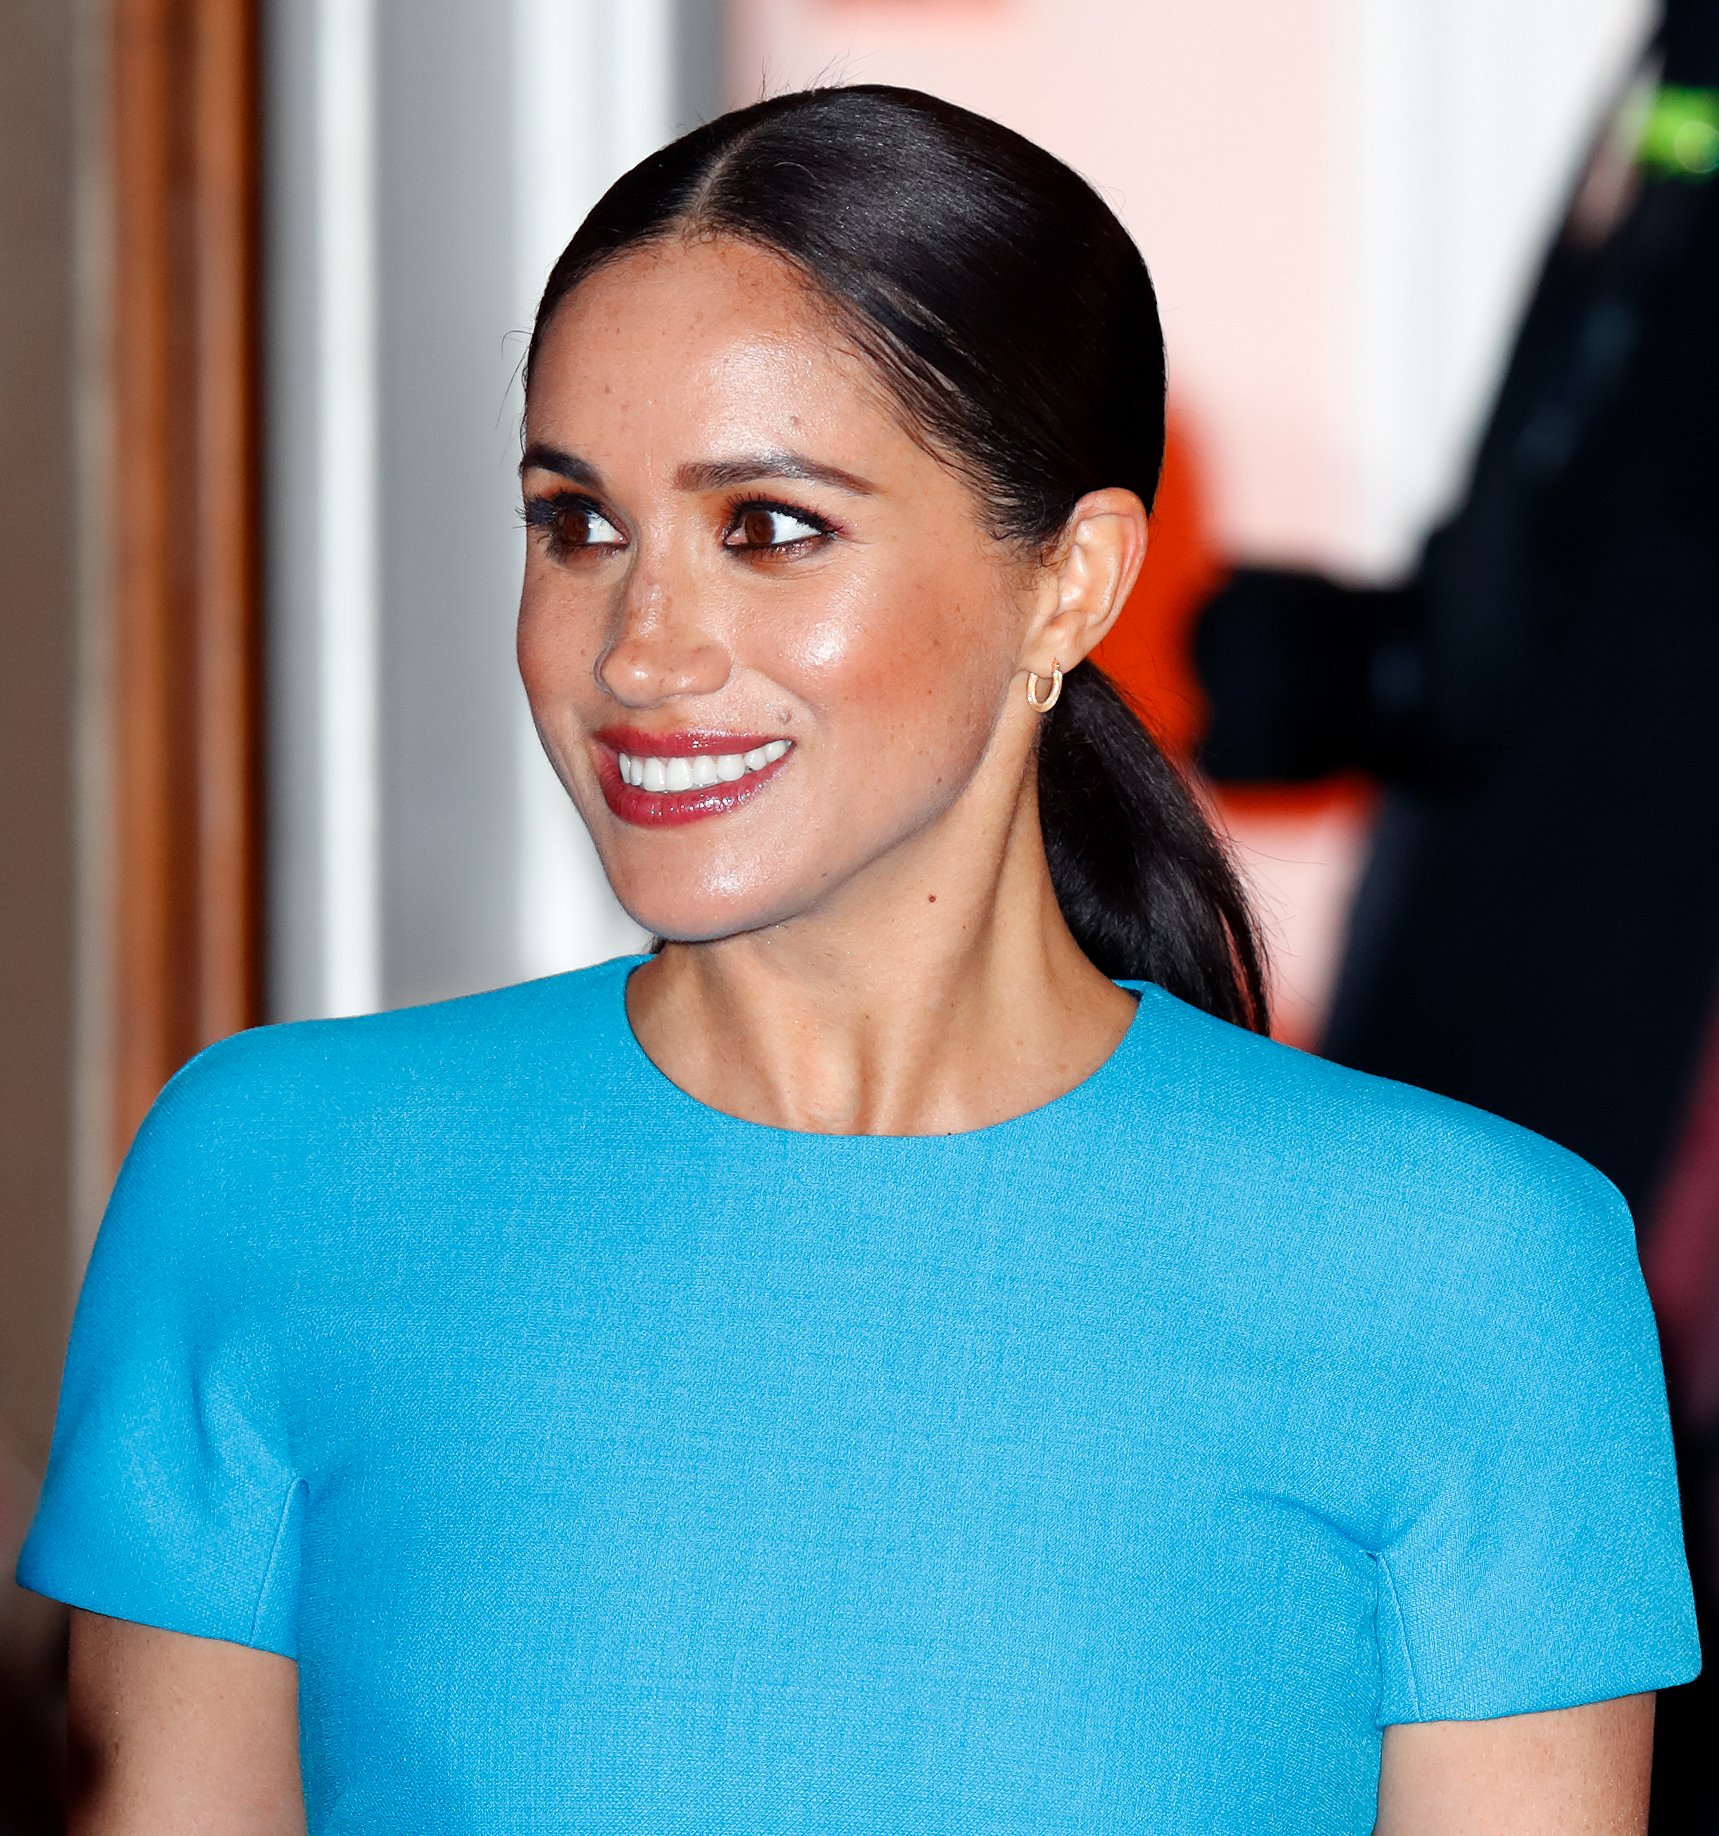 Meghan Markle attends The Endeavour Fund Awards at Mansion House on March 5, 2020 in London, England | Photo: Getty Images